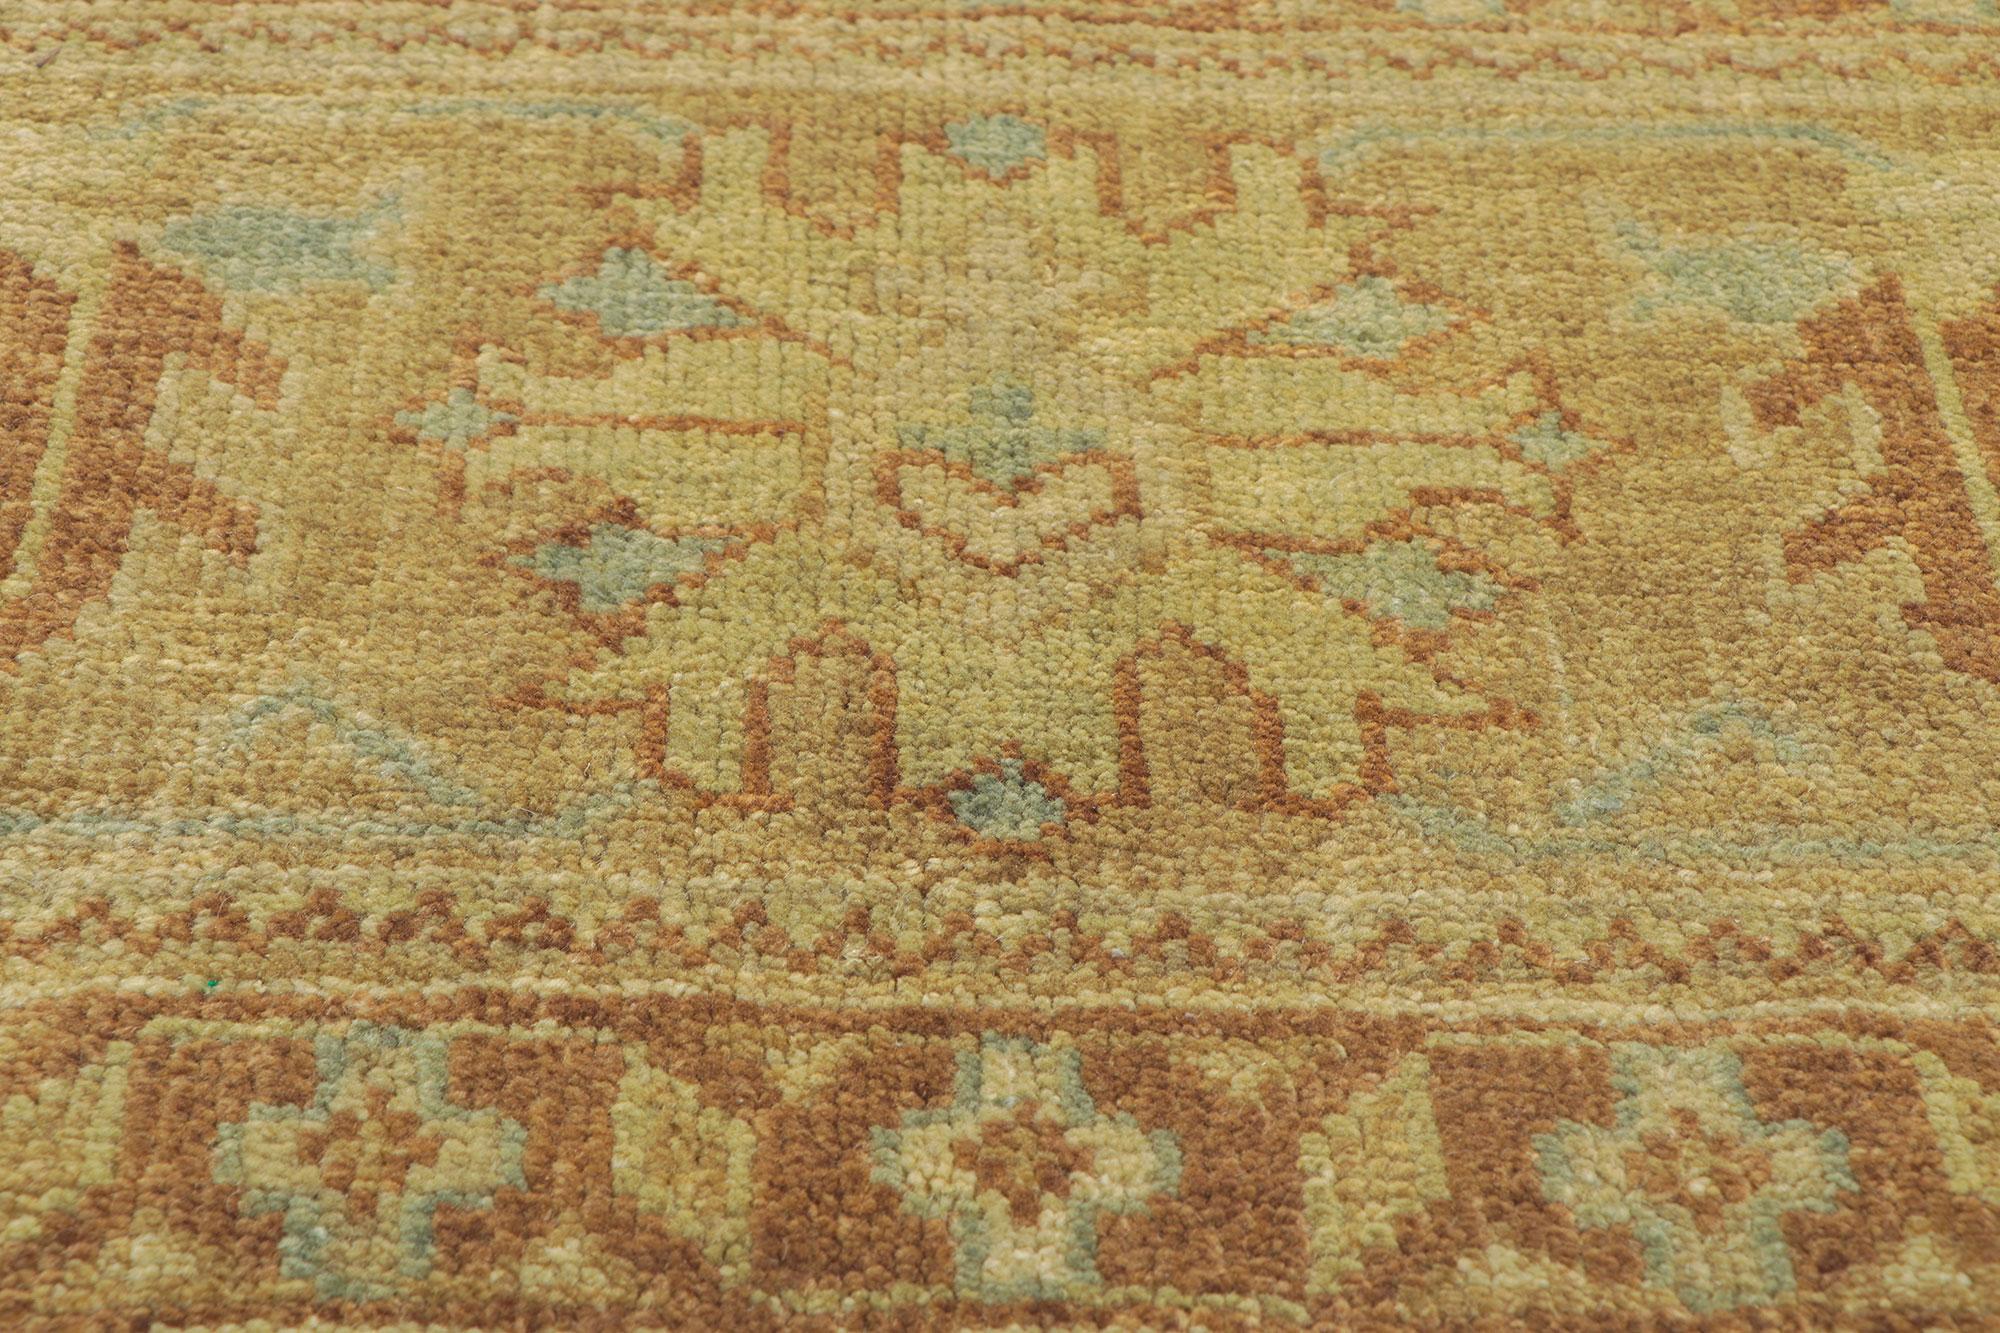 New Vintage-Inspired Oushak Rug with Earth-Tone Colors In New Condition For Sale In Dallas, TX